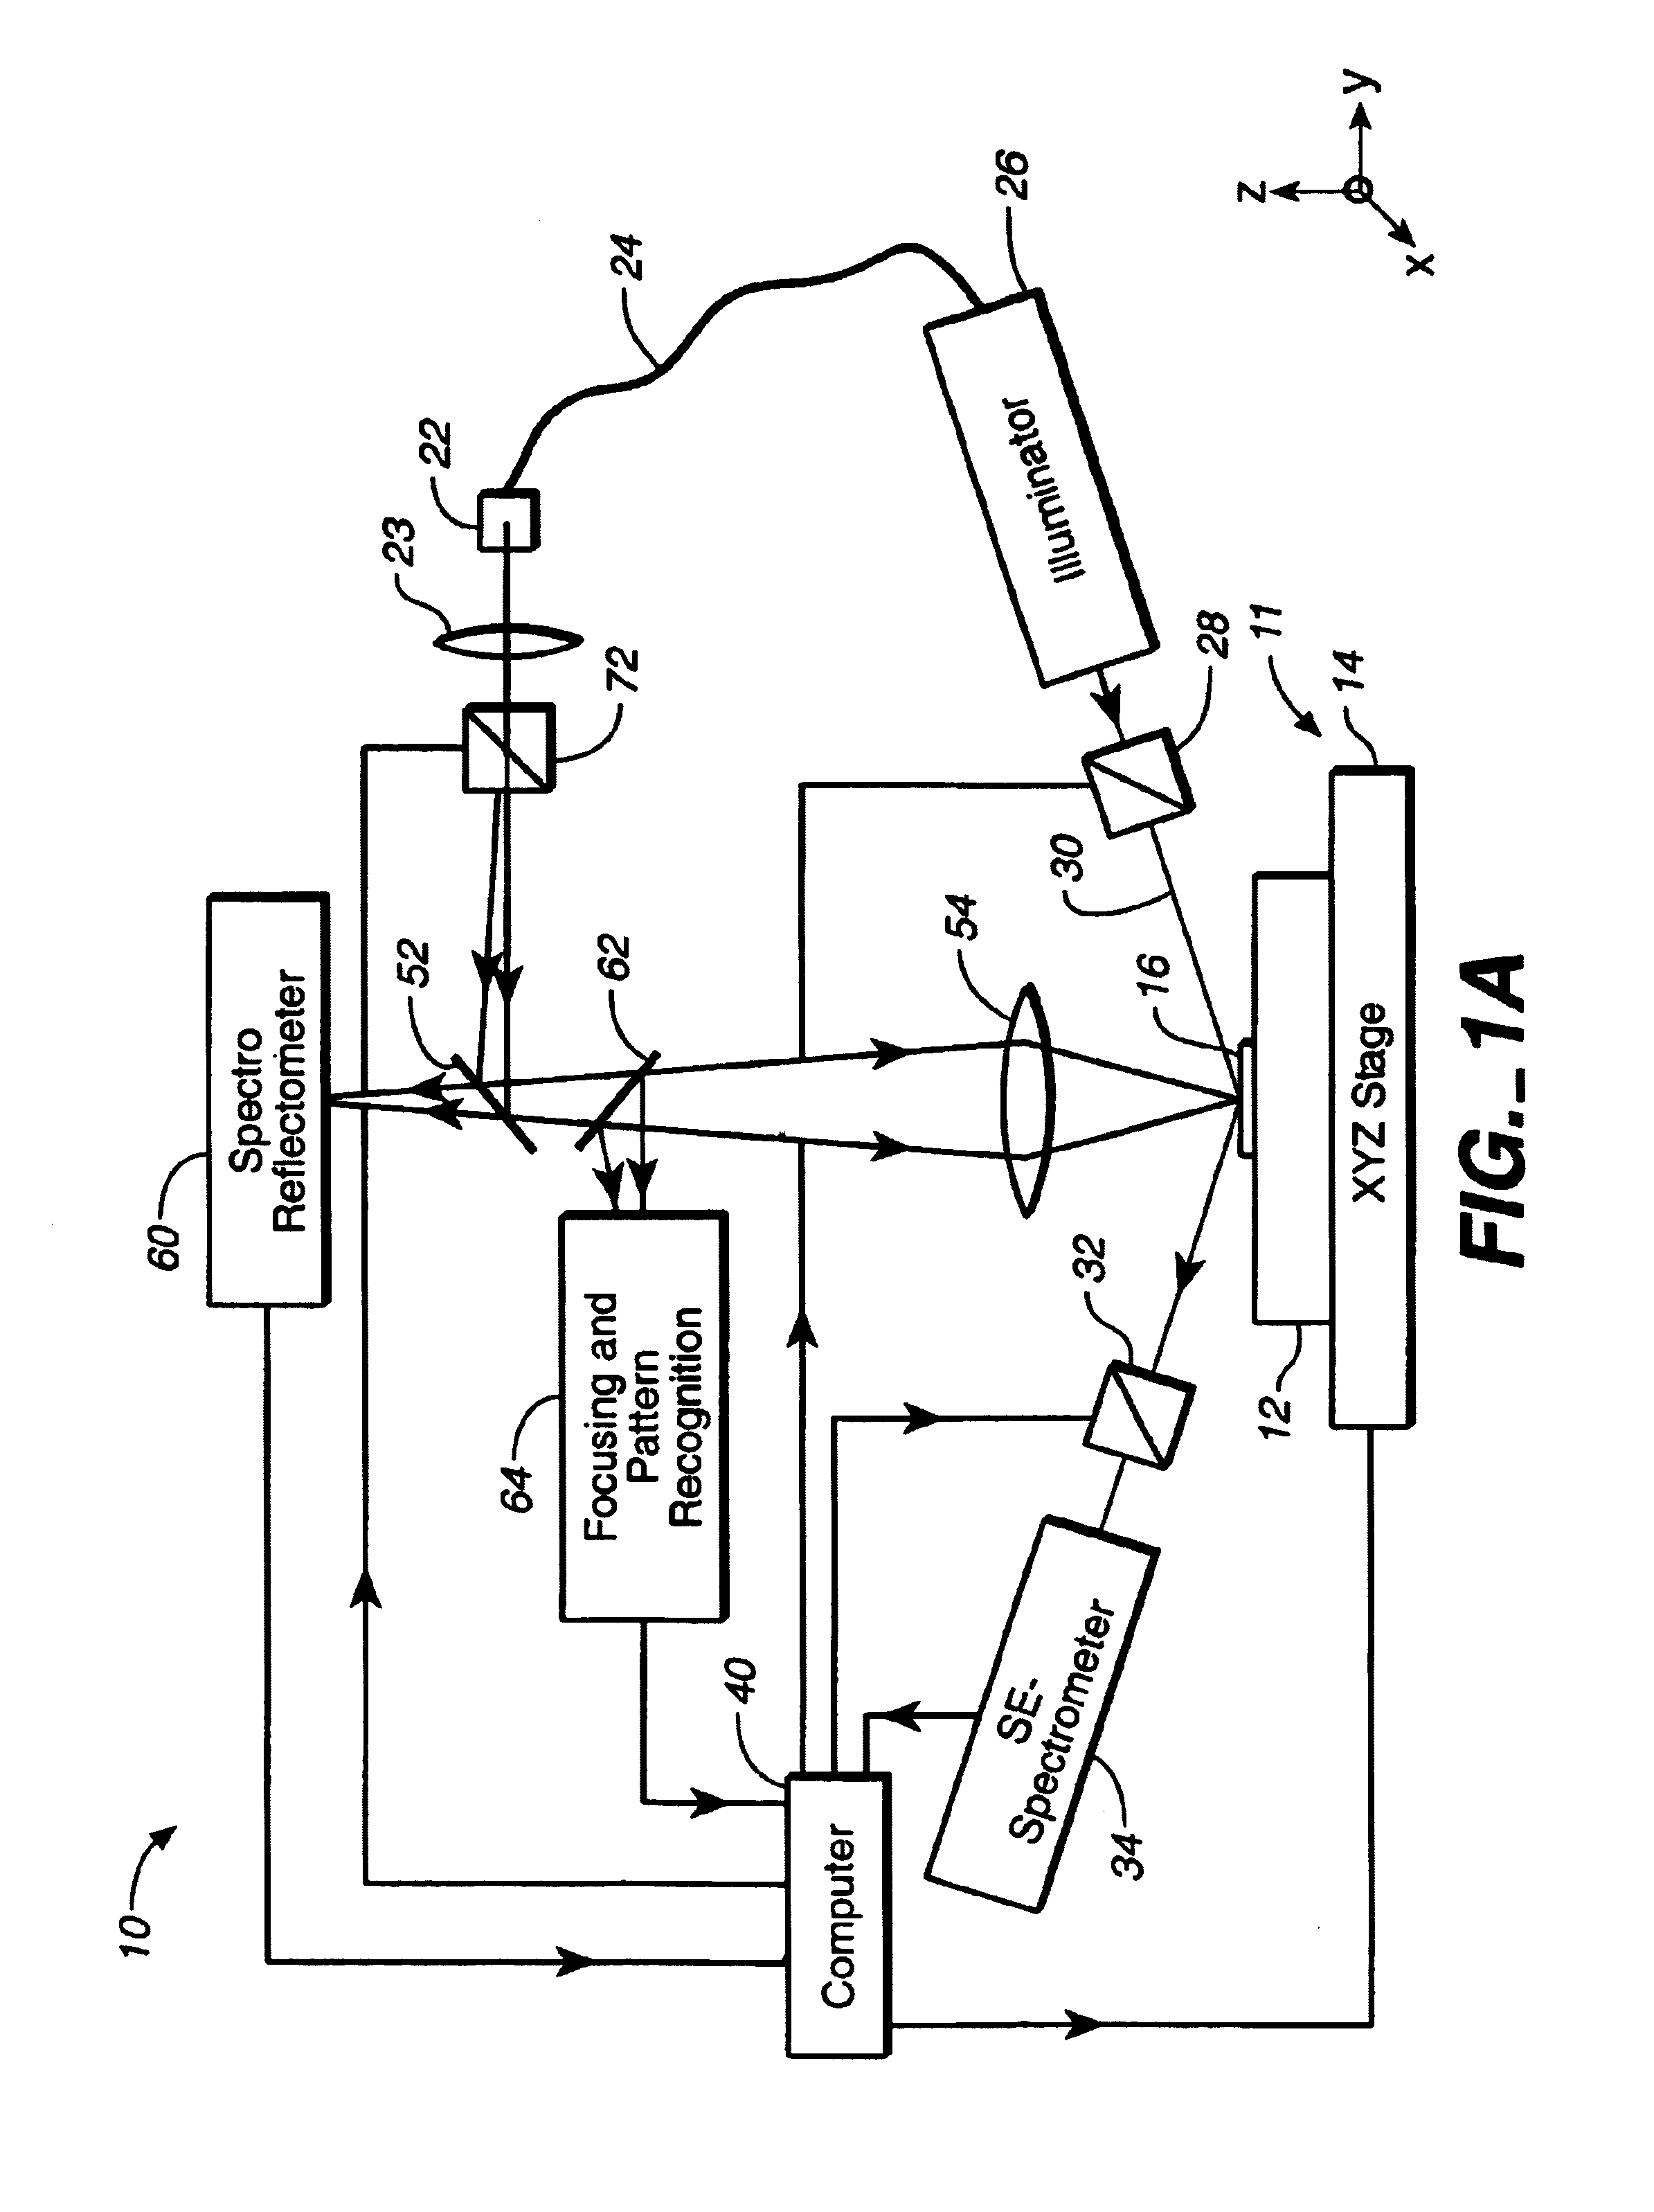 System for scatterometric measurements and applications